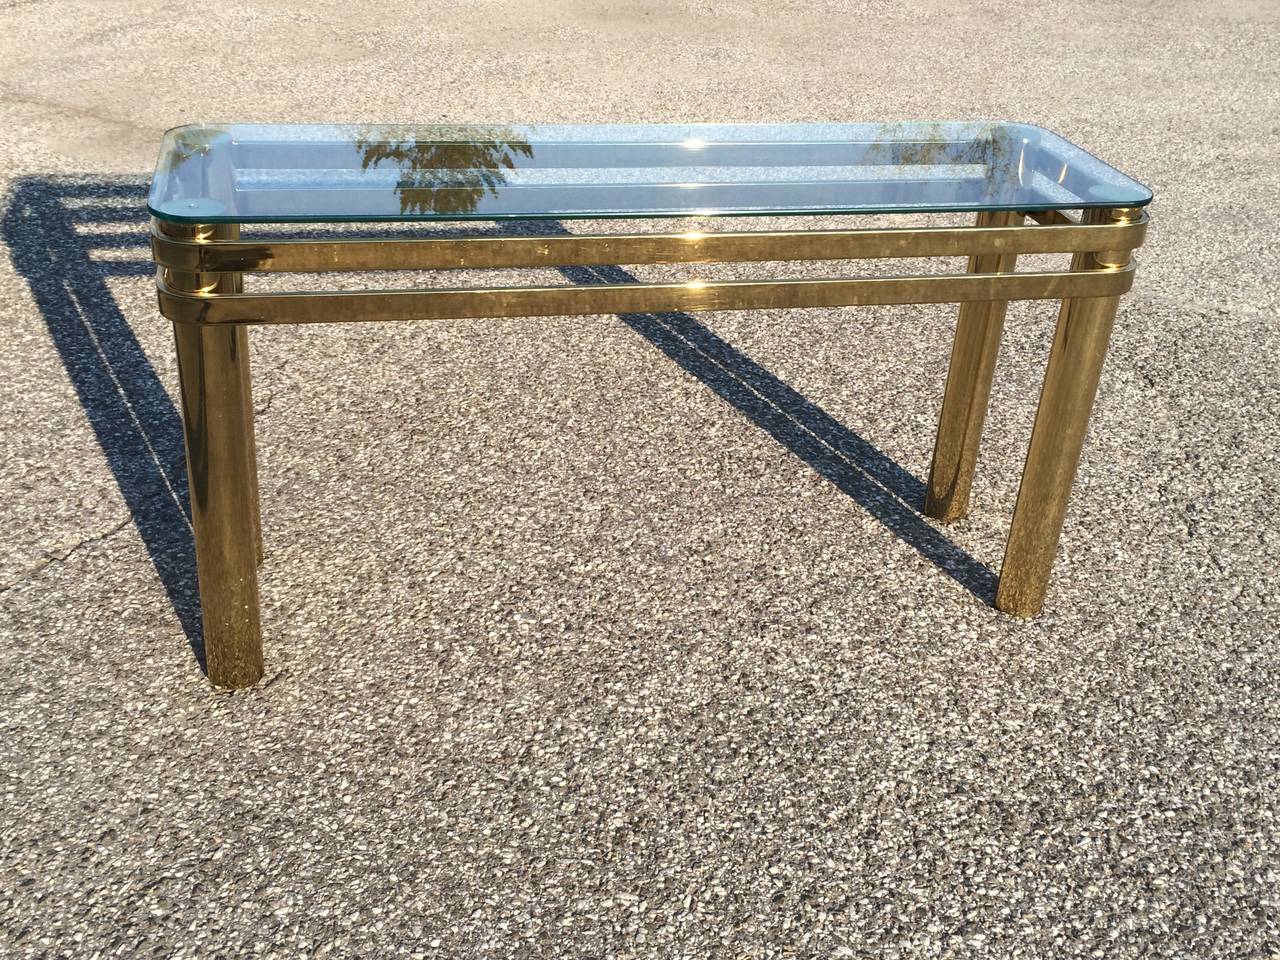 Hollywood Regency brass console or sofa table. Thick double banded tubular brass makes up this table. Matching side and coffee table available if you like matching sets.